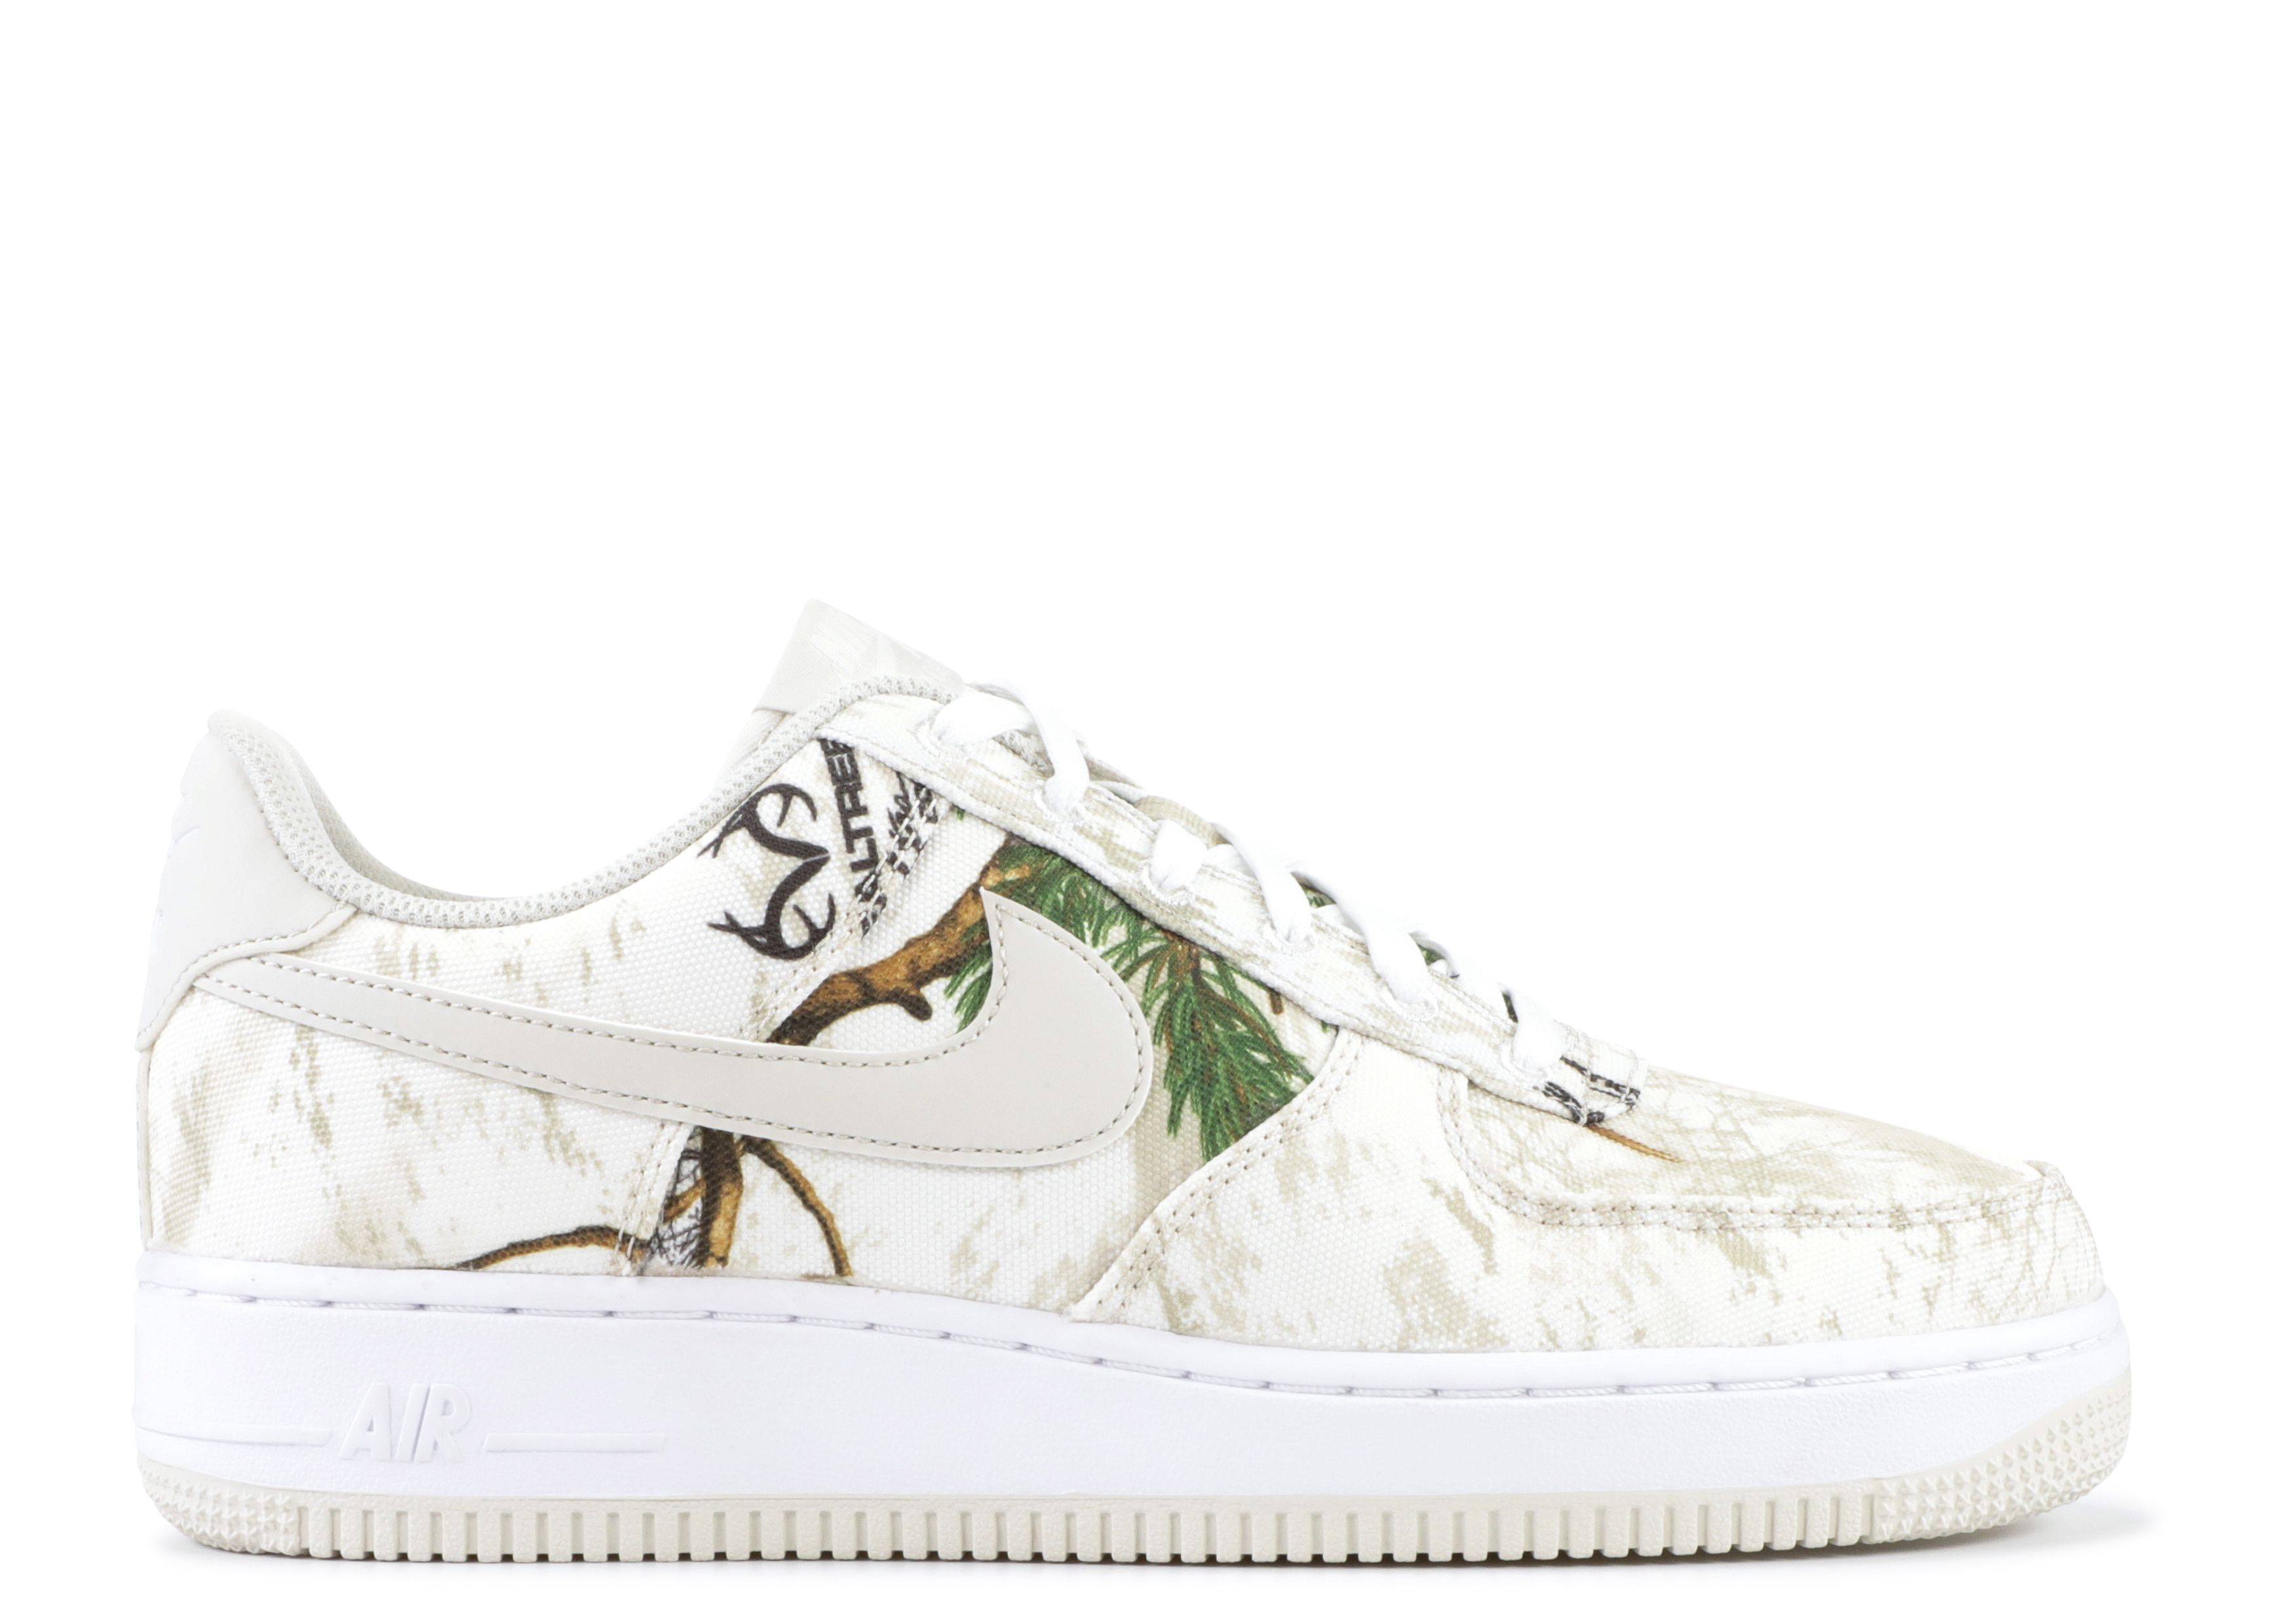 nike air force 1 low realtree camo